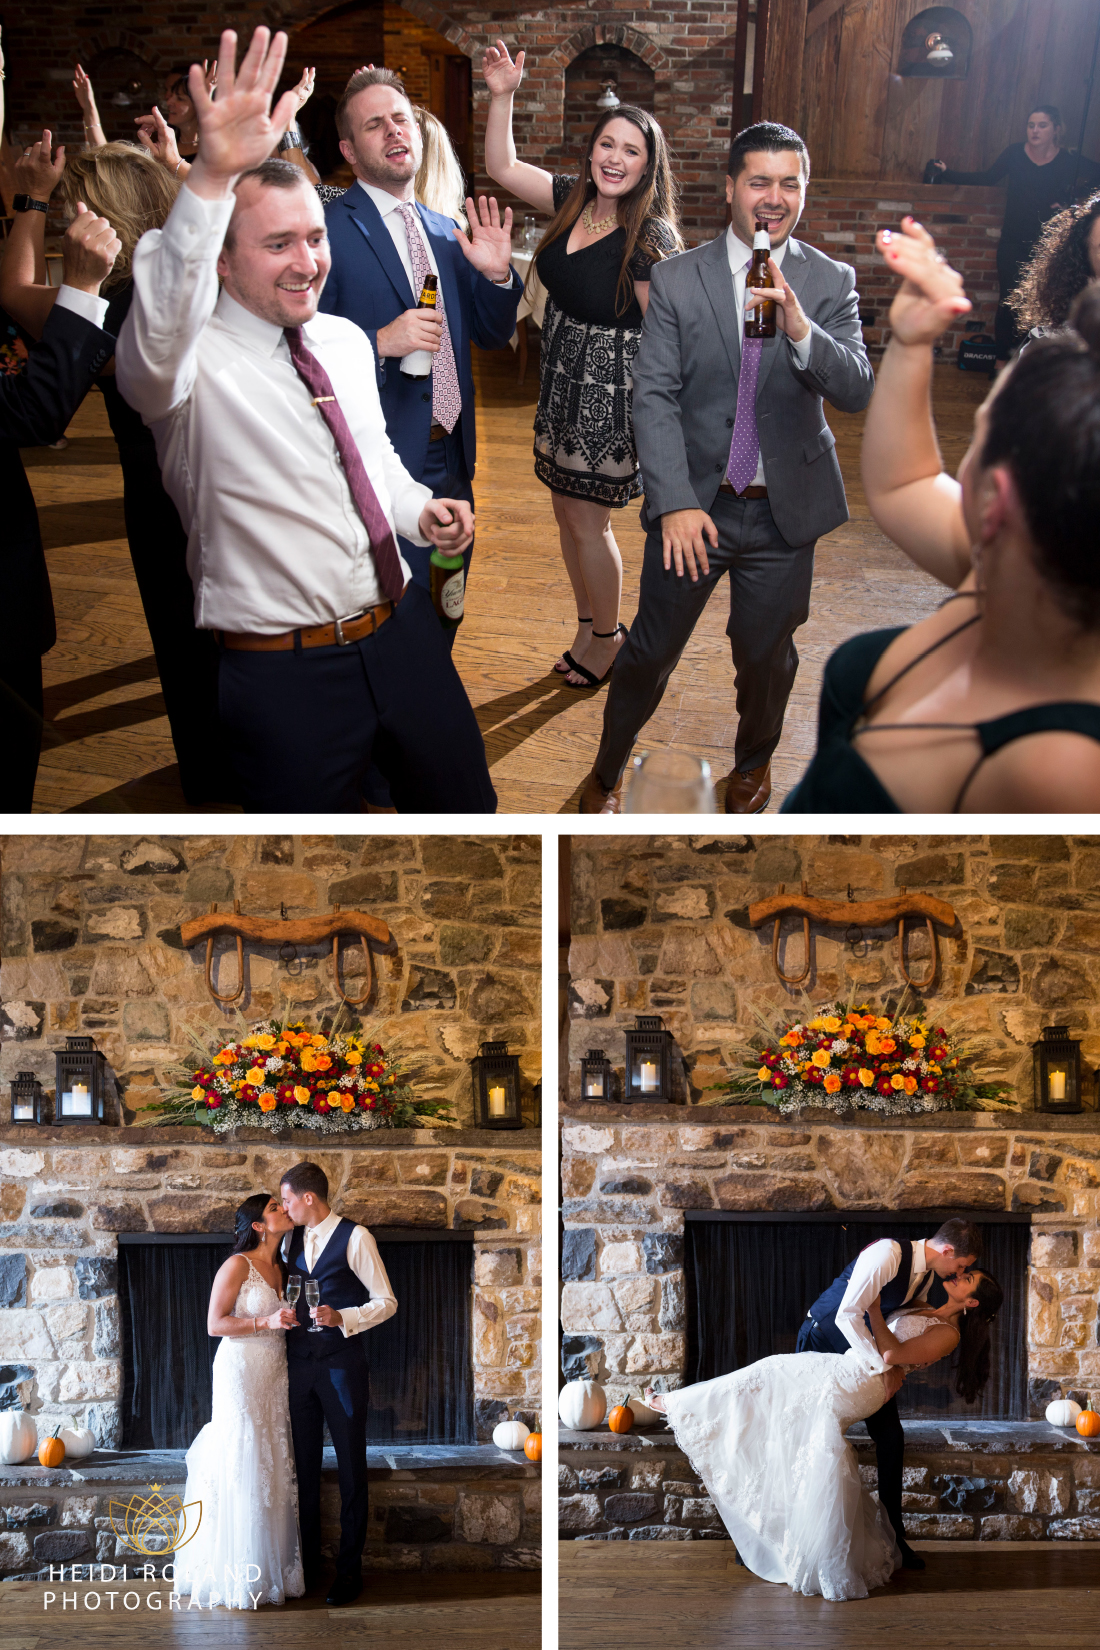 Stone Barn Kennett Square wedding dancing and bride and groom in front of fireplace